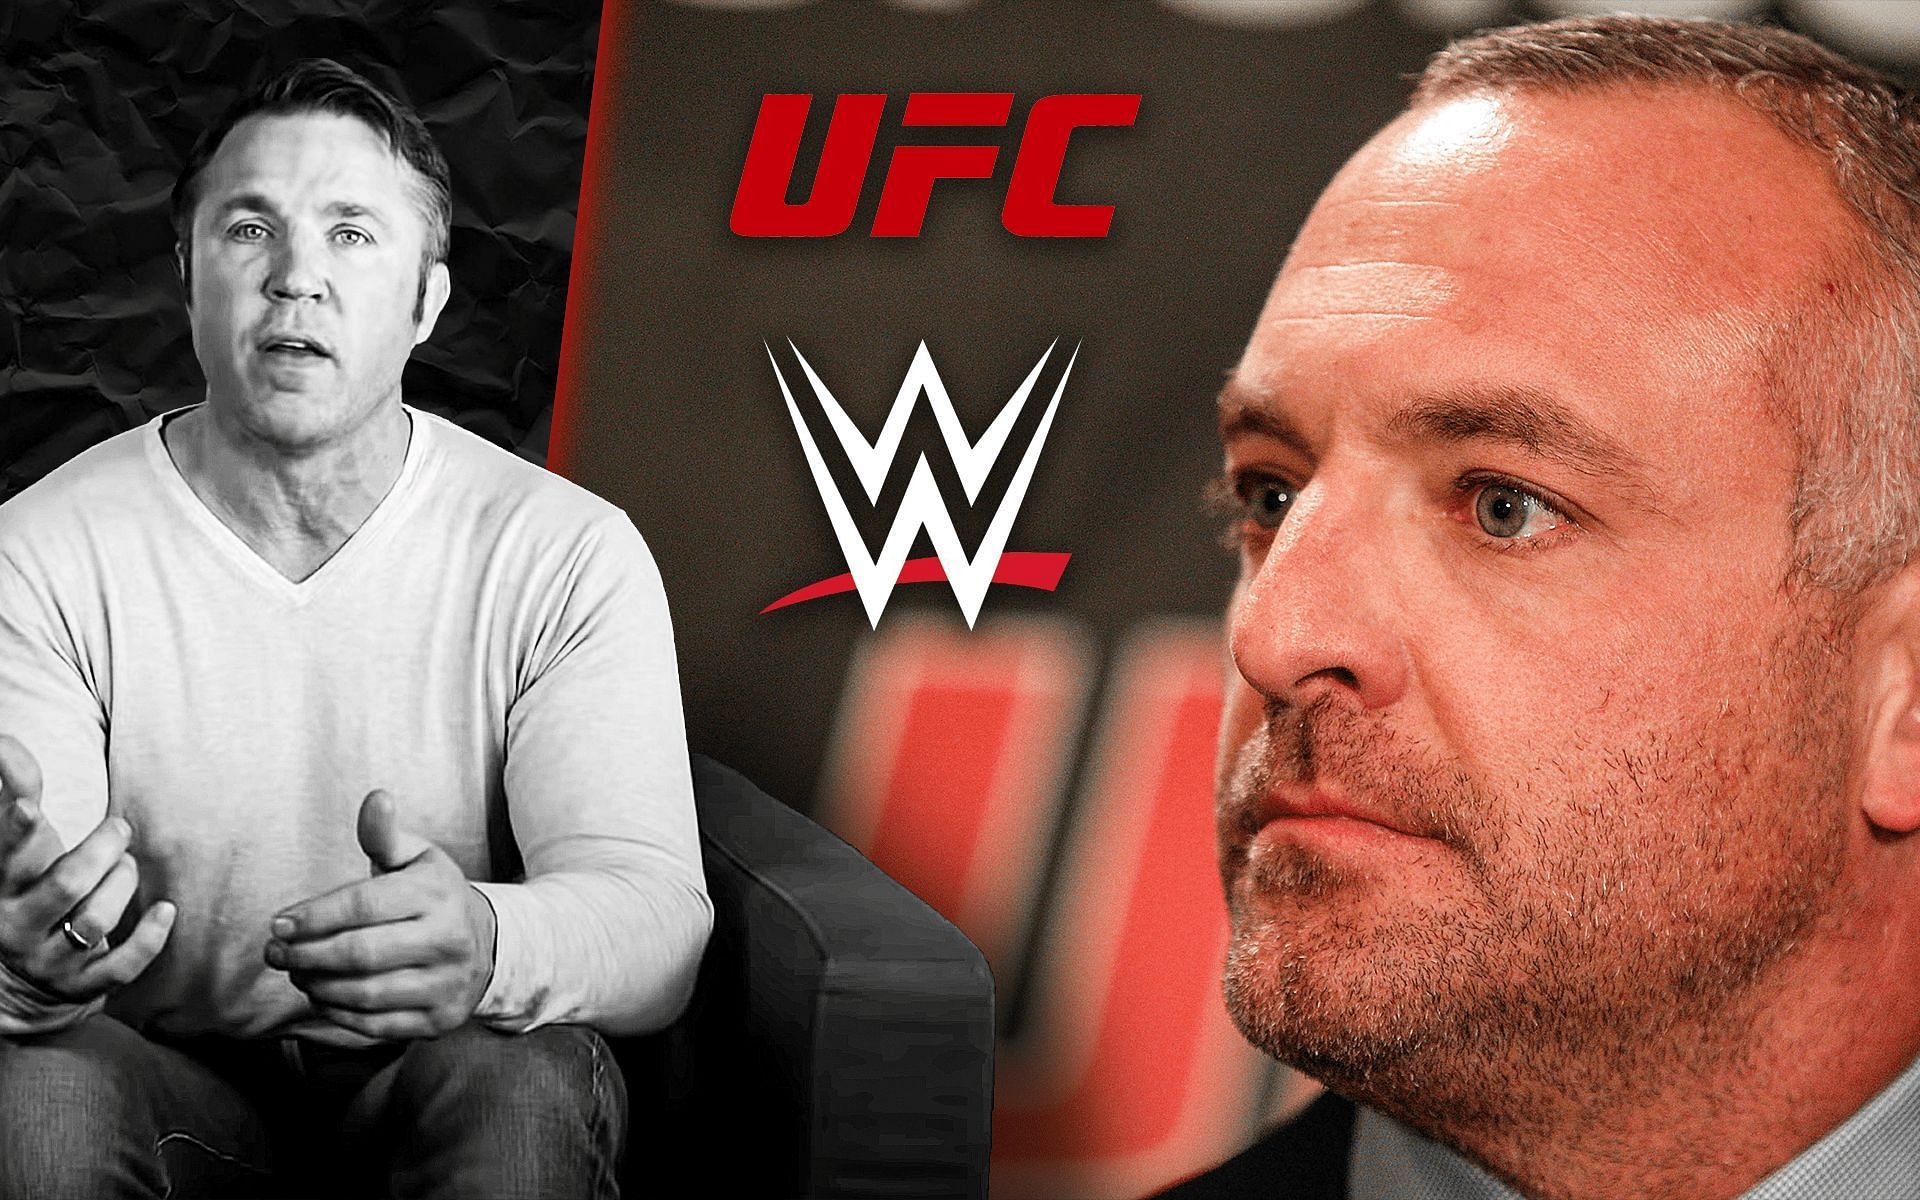 Chael Sonnen (left, image via Chael Sonnen on YouTube), UFC and WWE logos (center, images via @ufc and @wwe on Instagram), Lorenzo Fertitta (right, image via Getty)